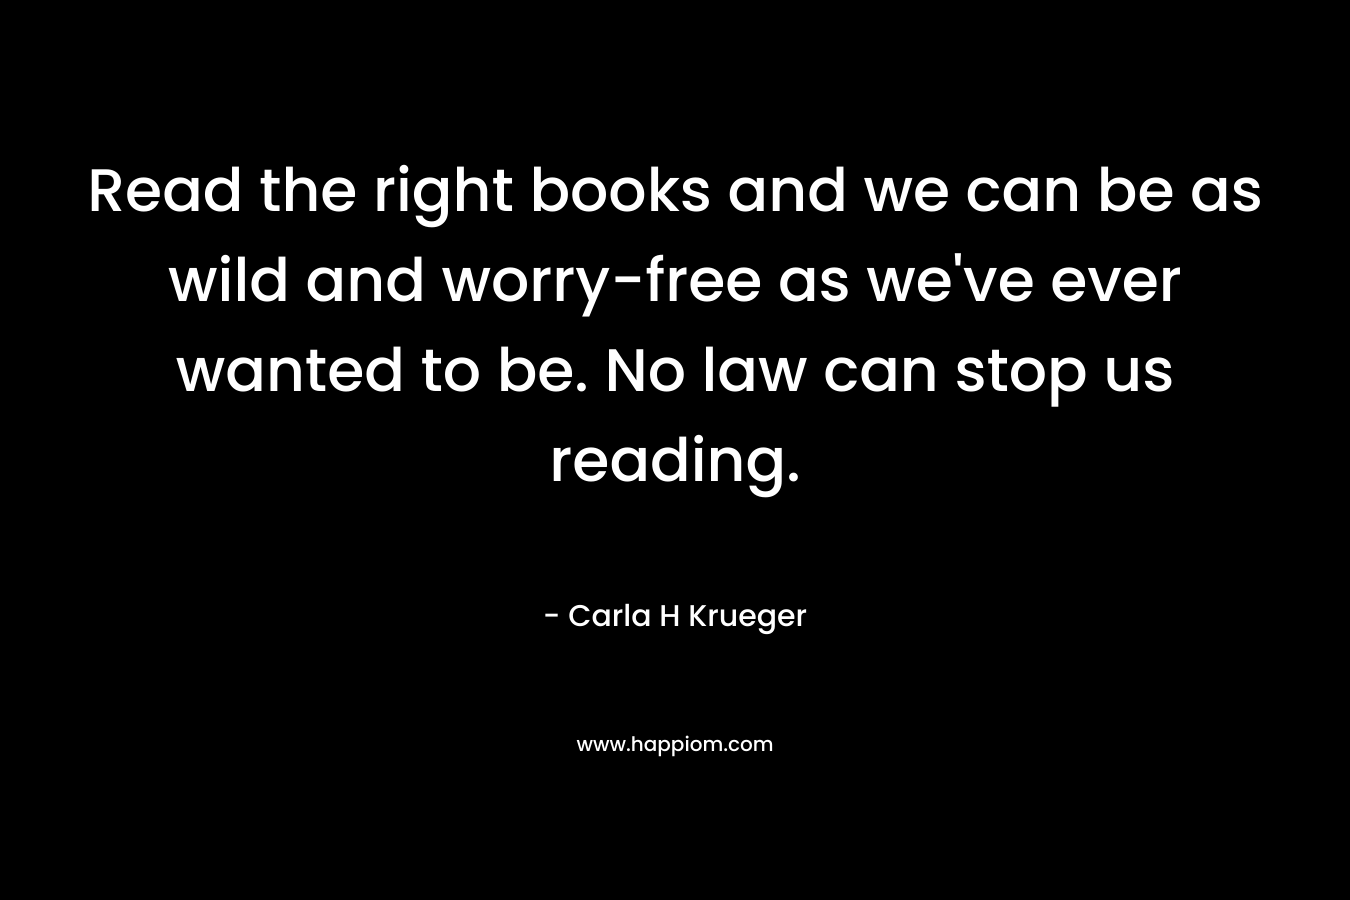 Read the right books and we can be as wild and worry-free as we’ve ever wanted to be. No law can stop us reading. – Carla H Krueger